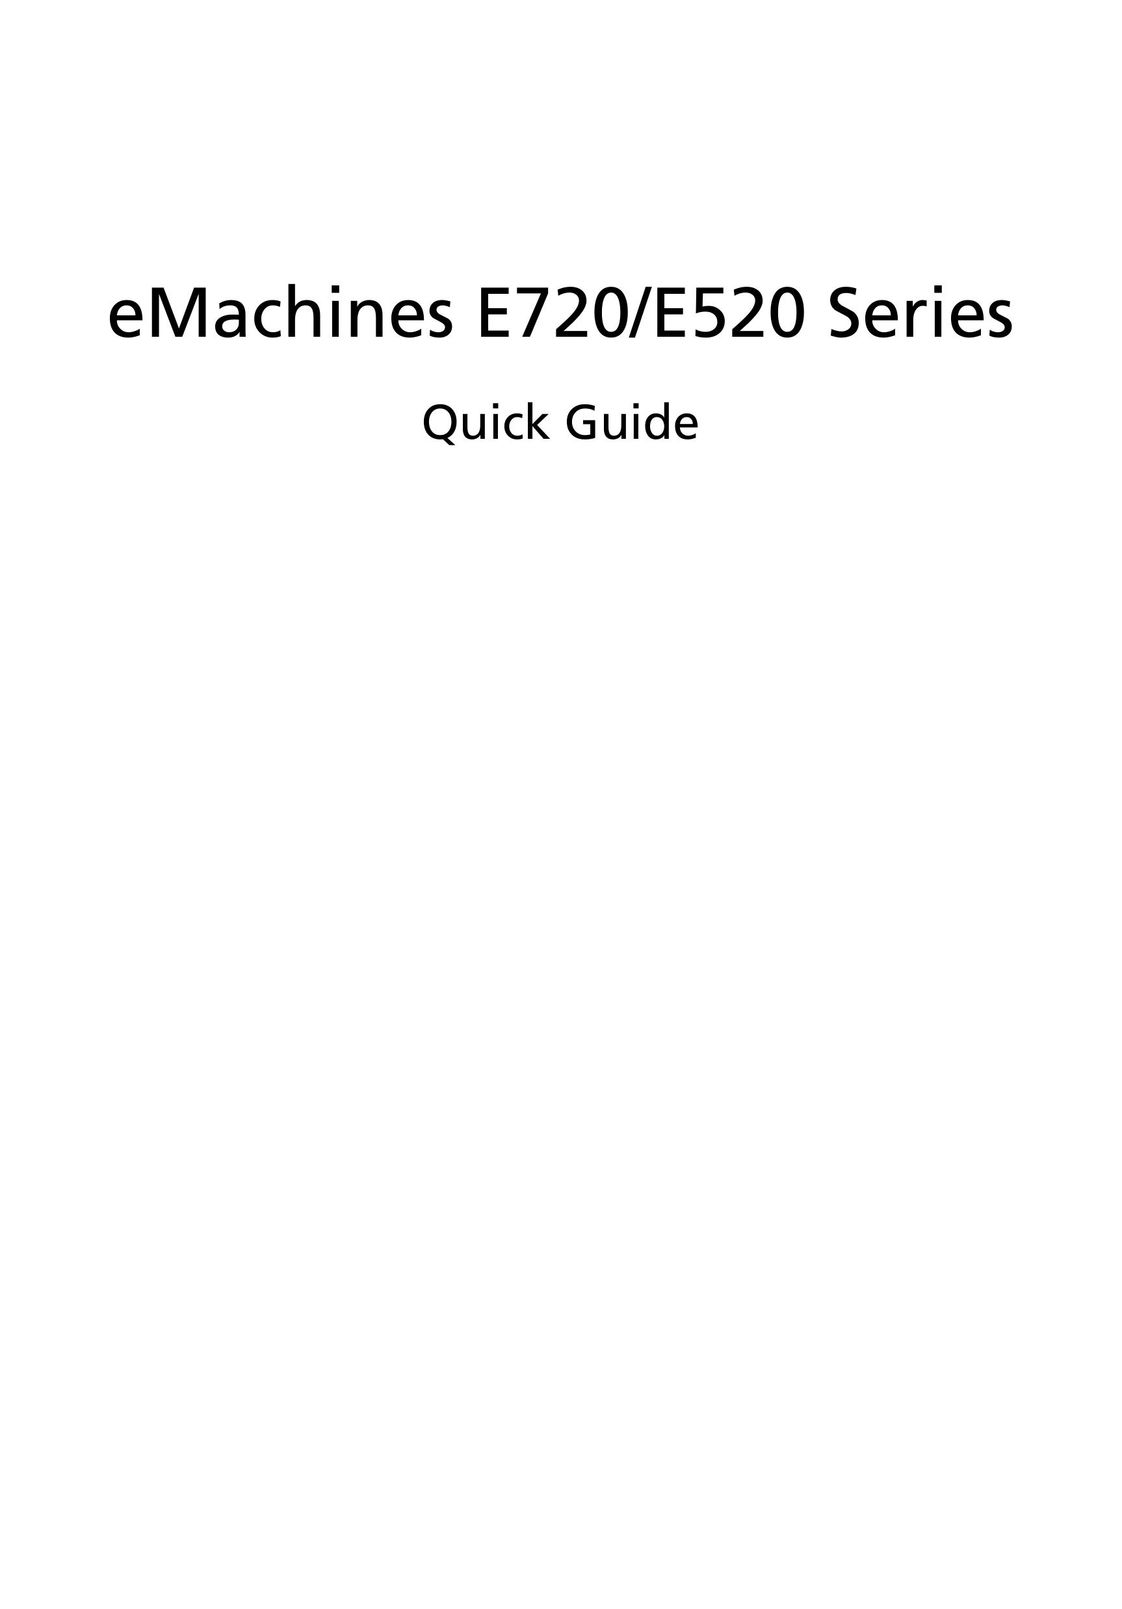 eMachines E720 Series Laptop User Manual